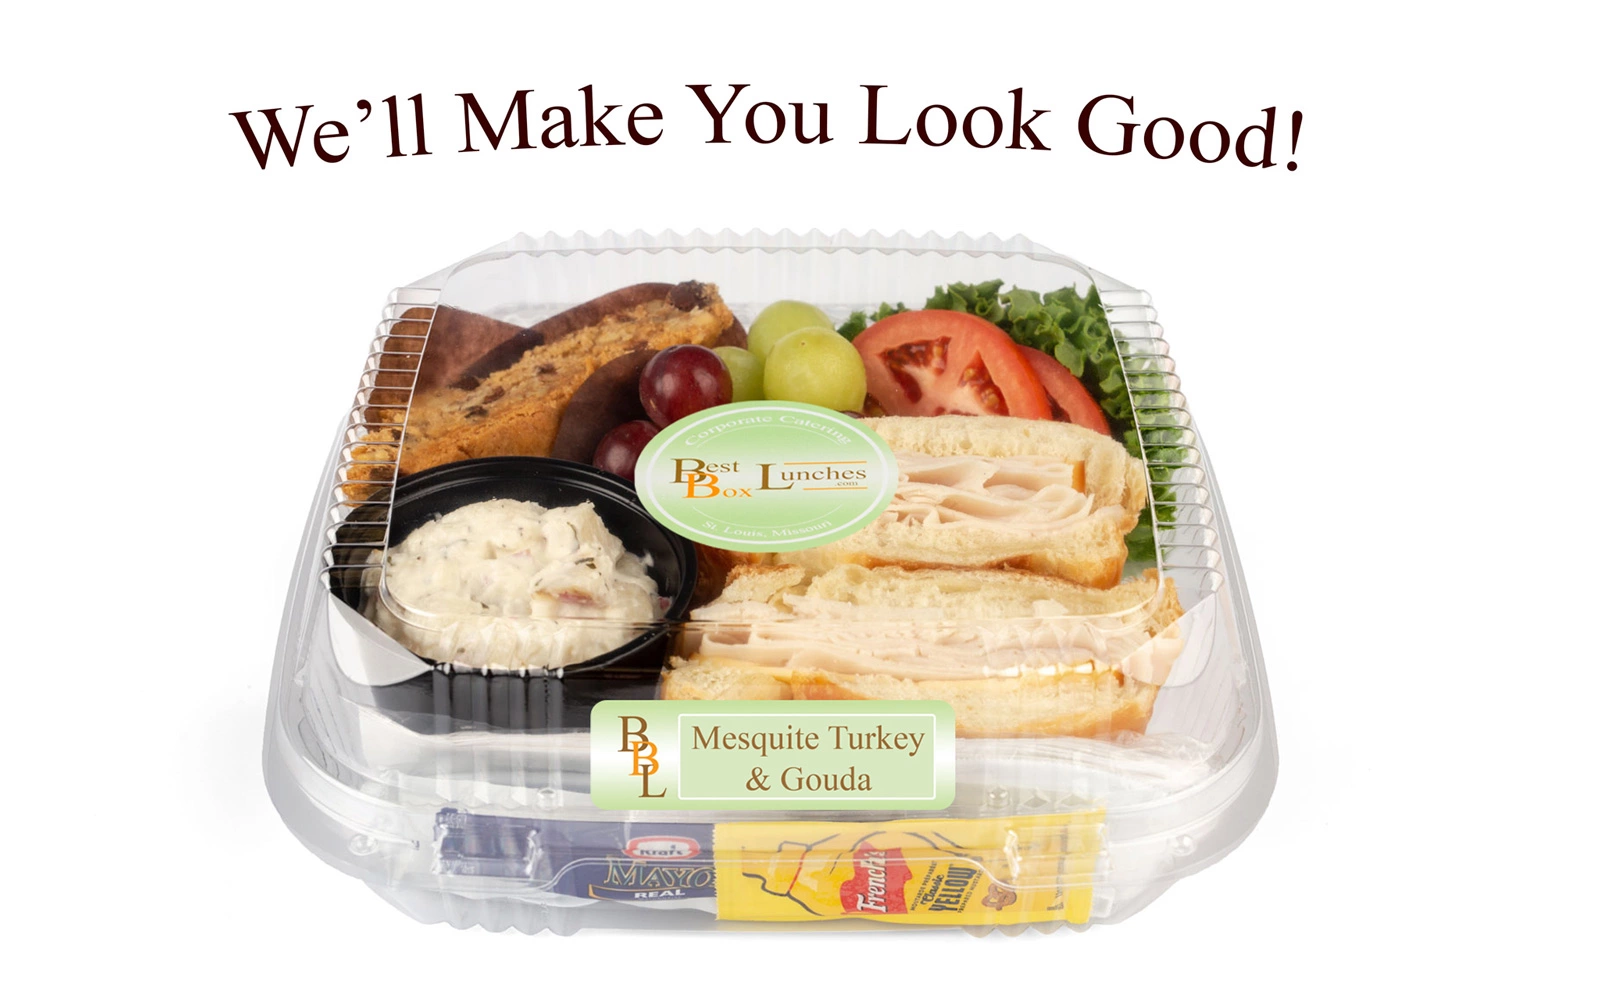 Best Box Lunches - Individual boxed lunch catering